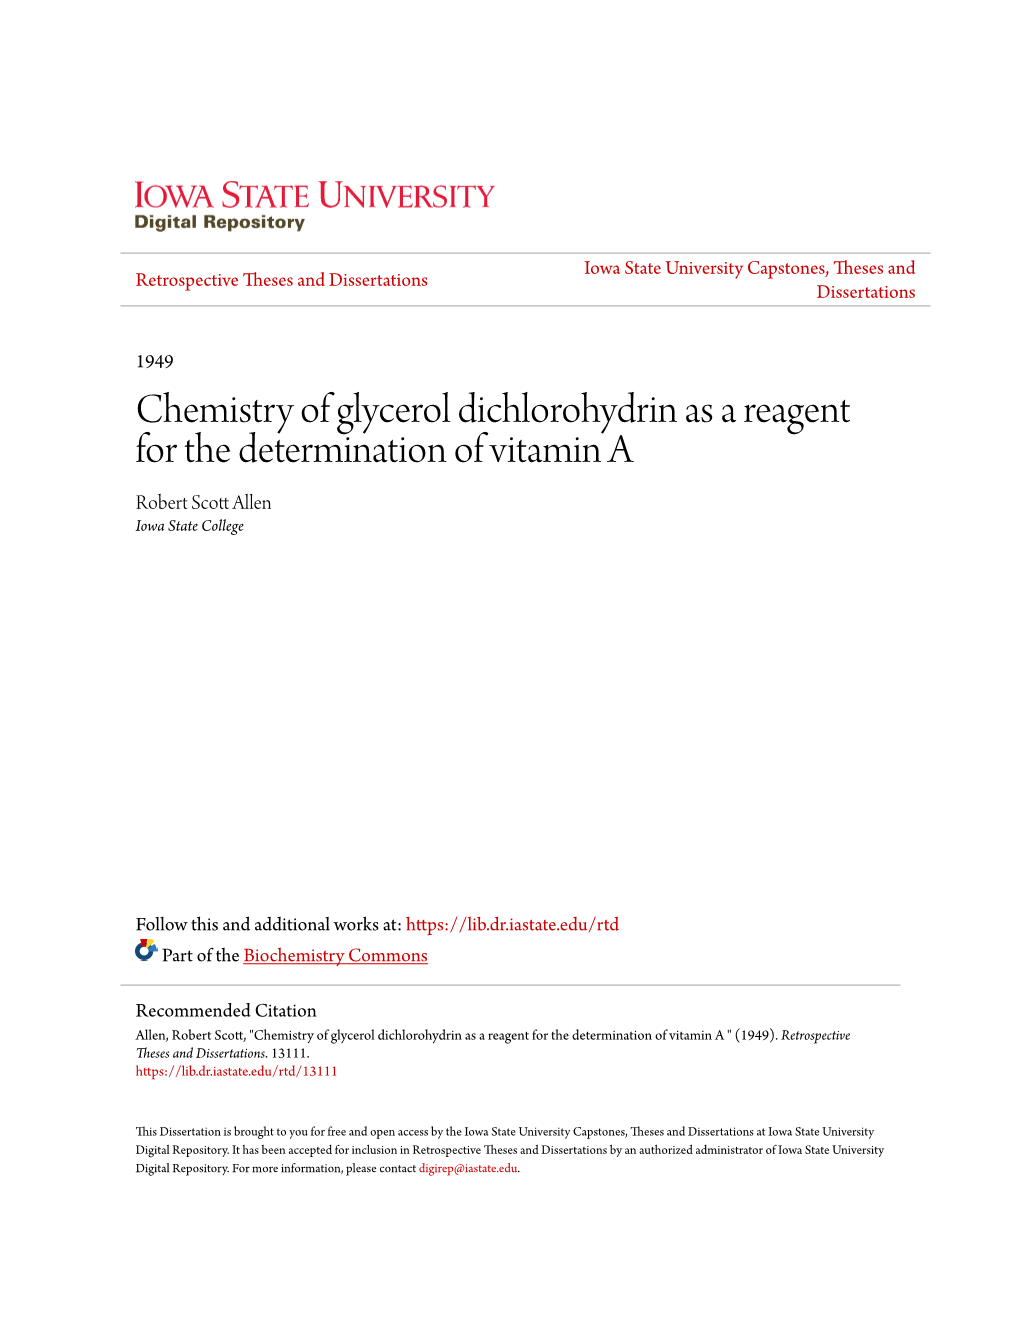 Chemistry of Glycerol Dichlorohydrin As a Reagent for the Determination of Vitamin a Robert Scott Allen Iowa State College